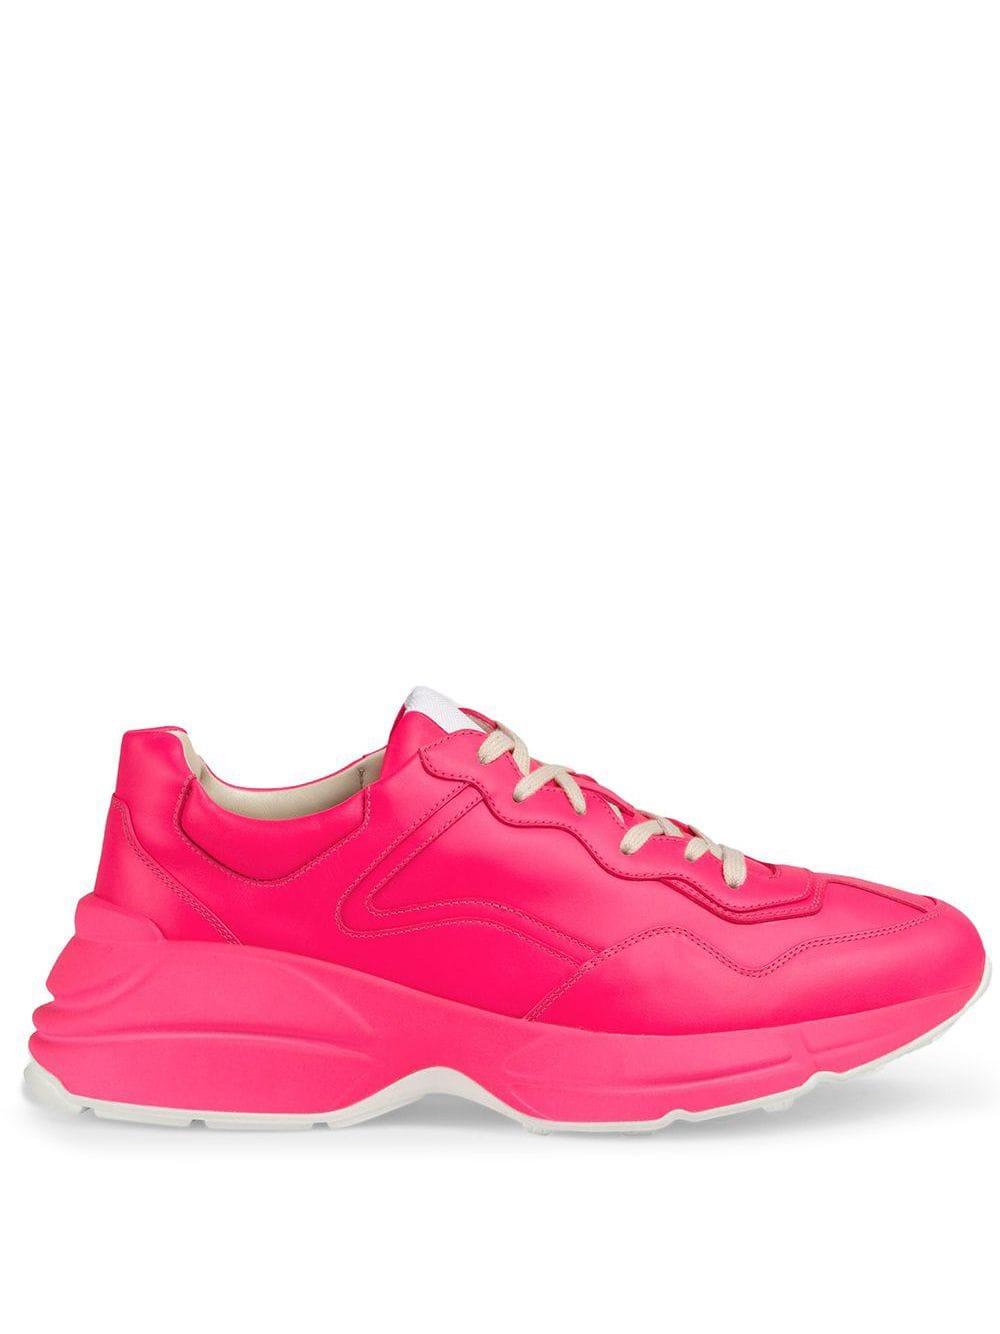 Gucci Rhyton Fluorescent Leather Sneaker in Pink for Men - Lyst